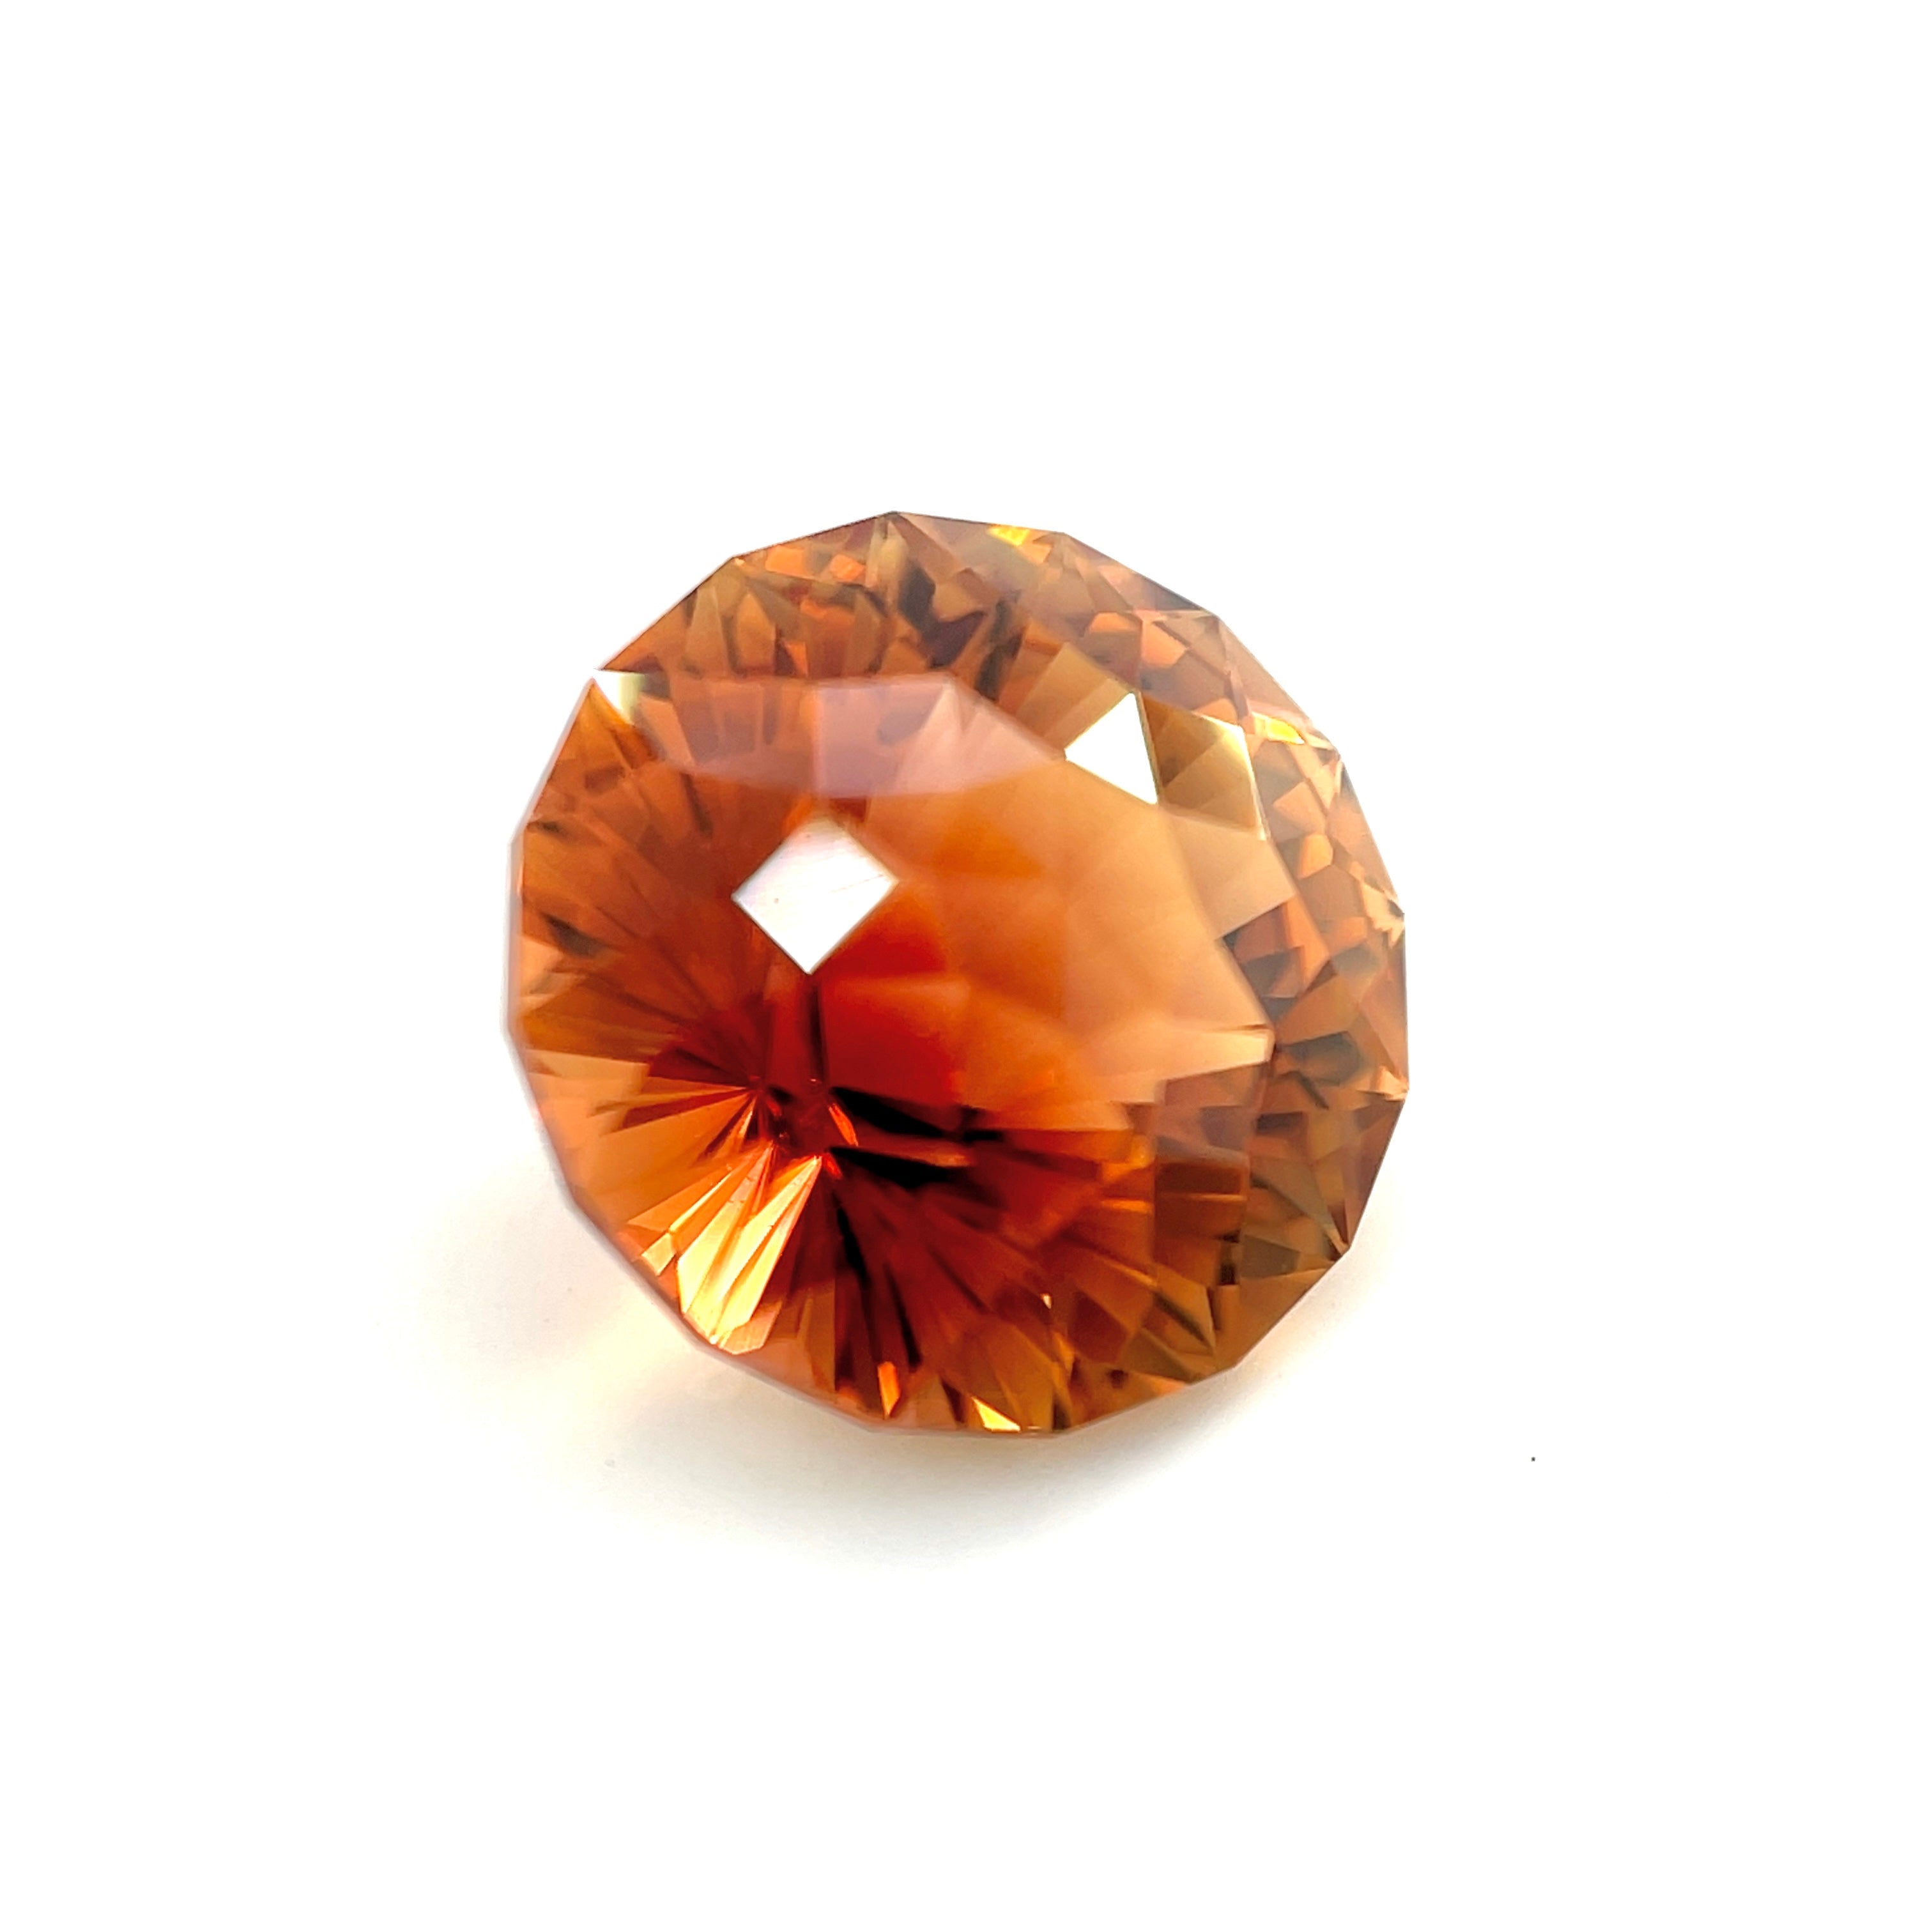 Faceted Tourmaline - 4.49 CTW